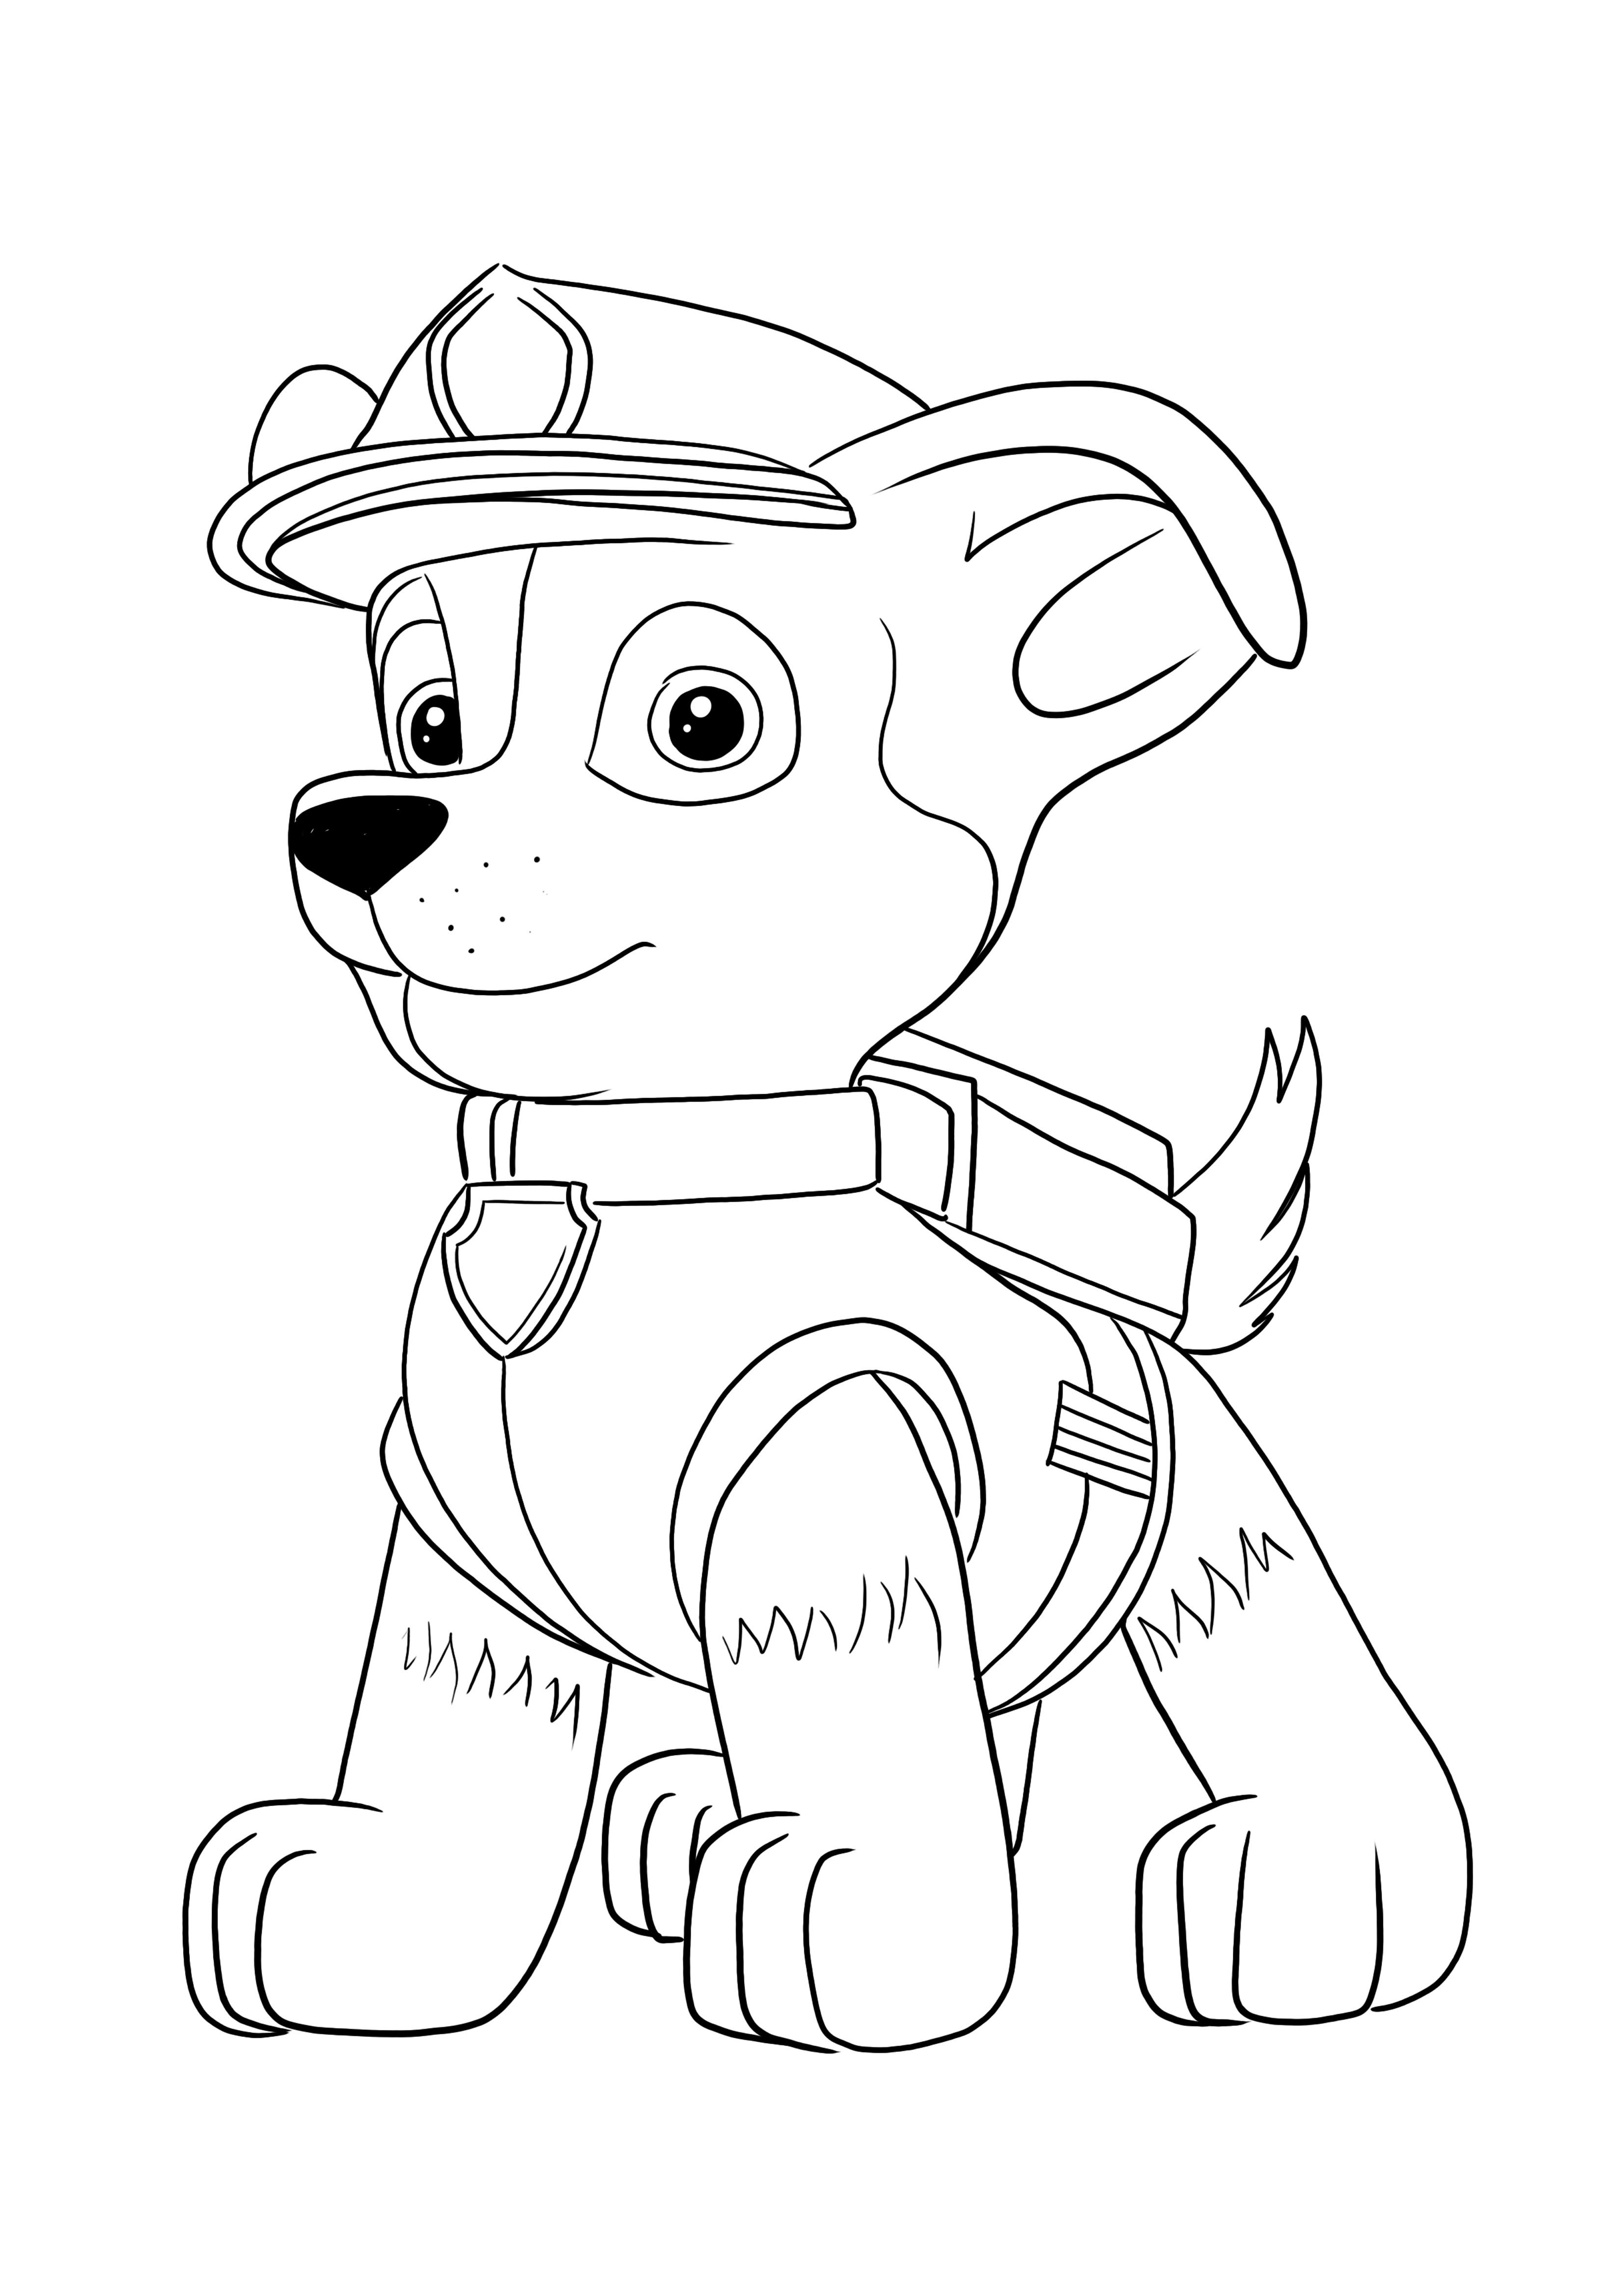 Free printable of Chase-the serious police dog for coloring and having fun